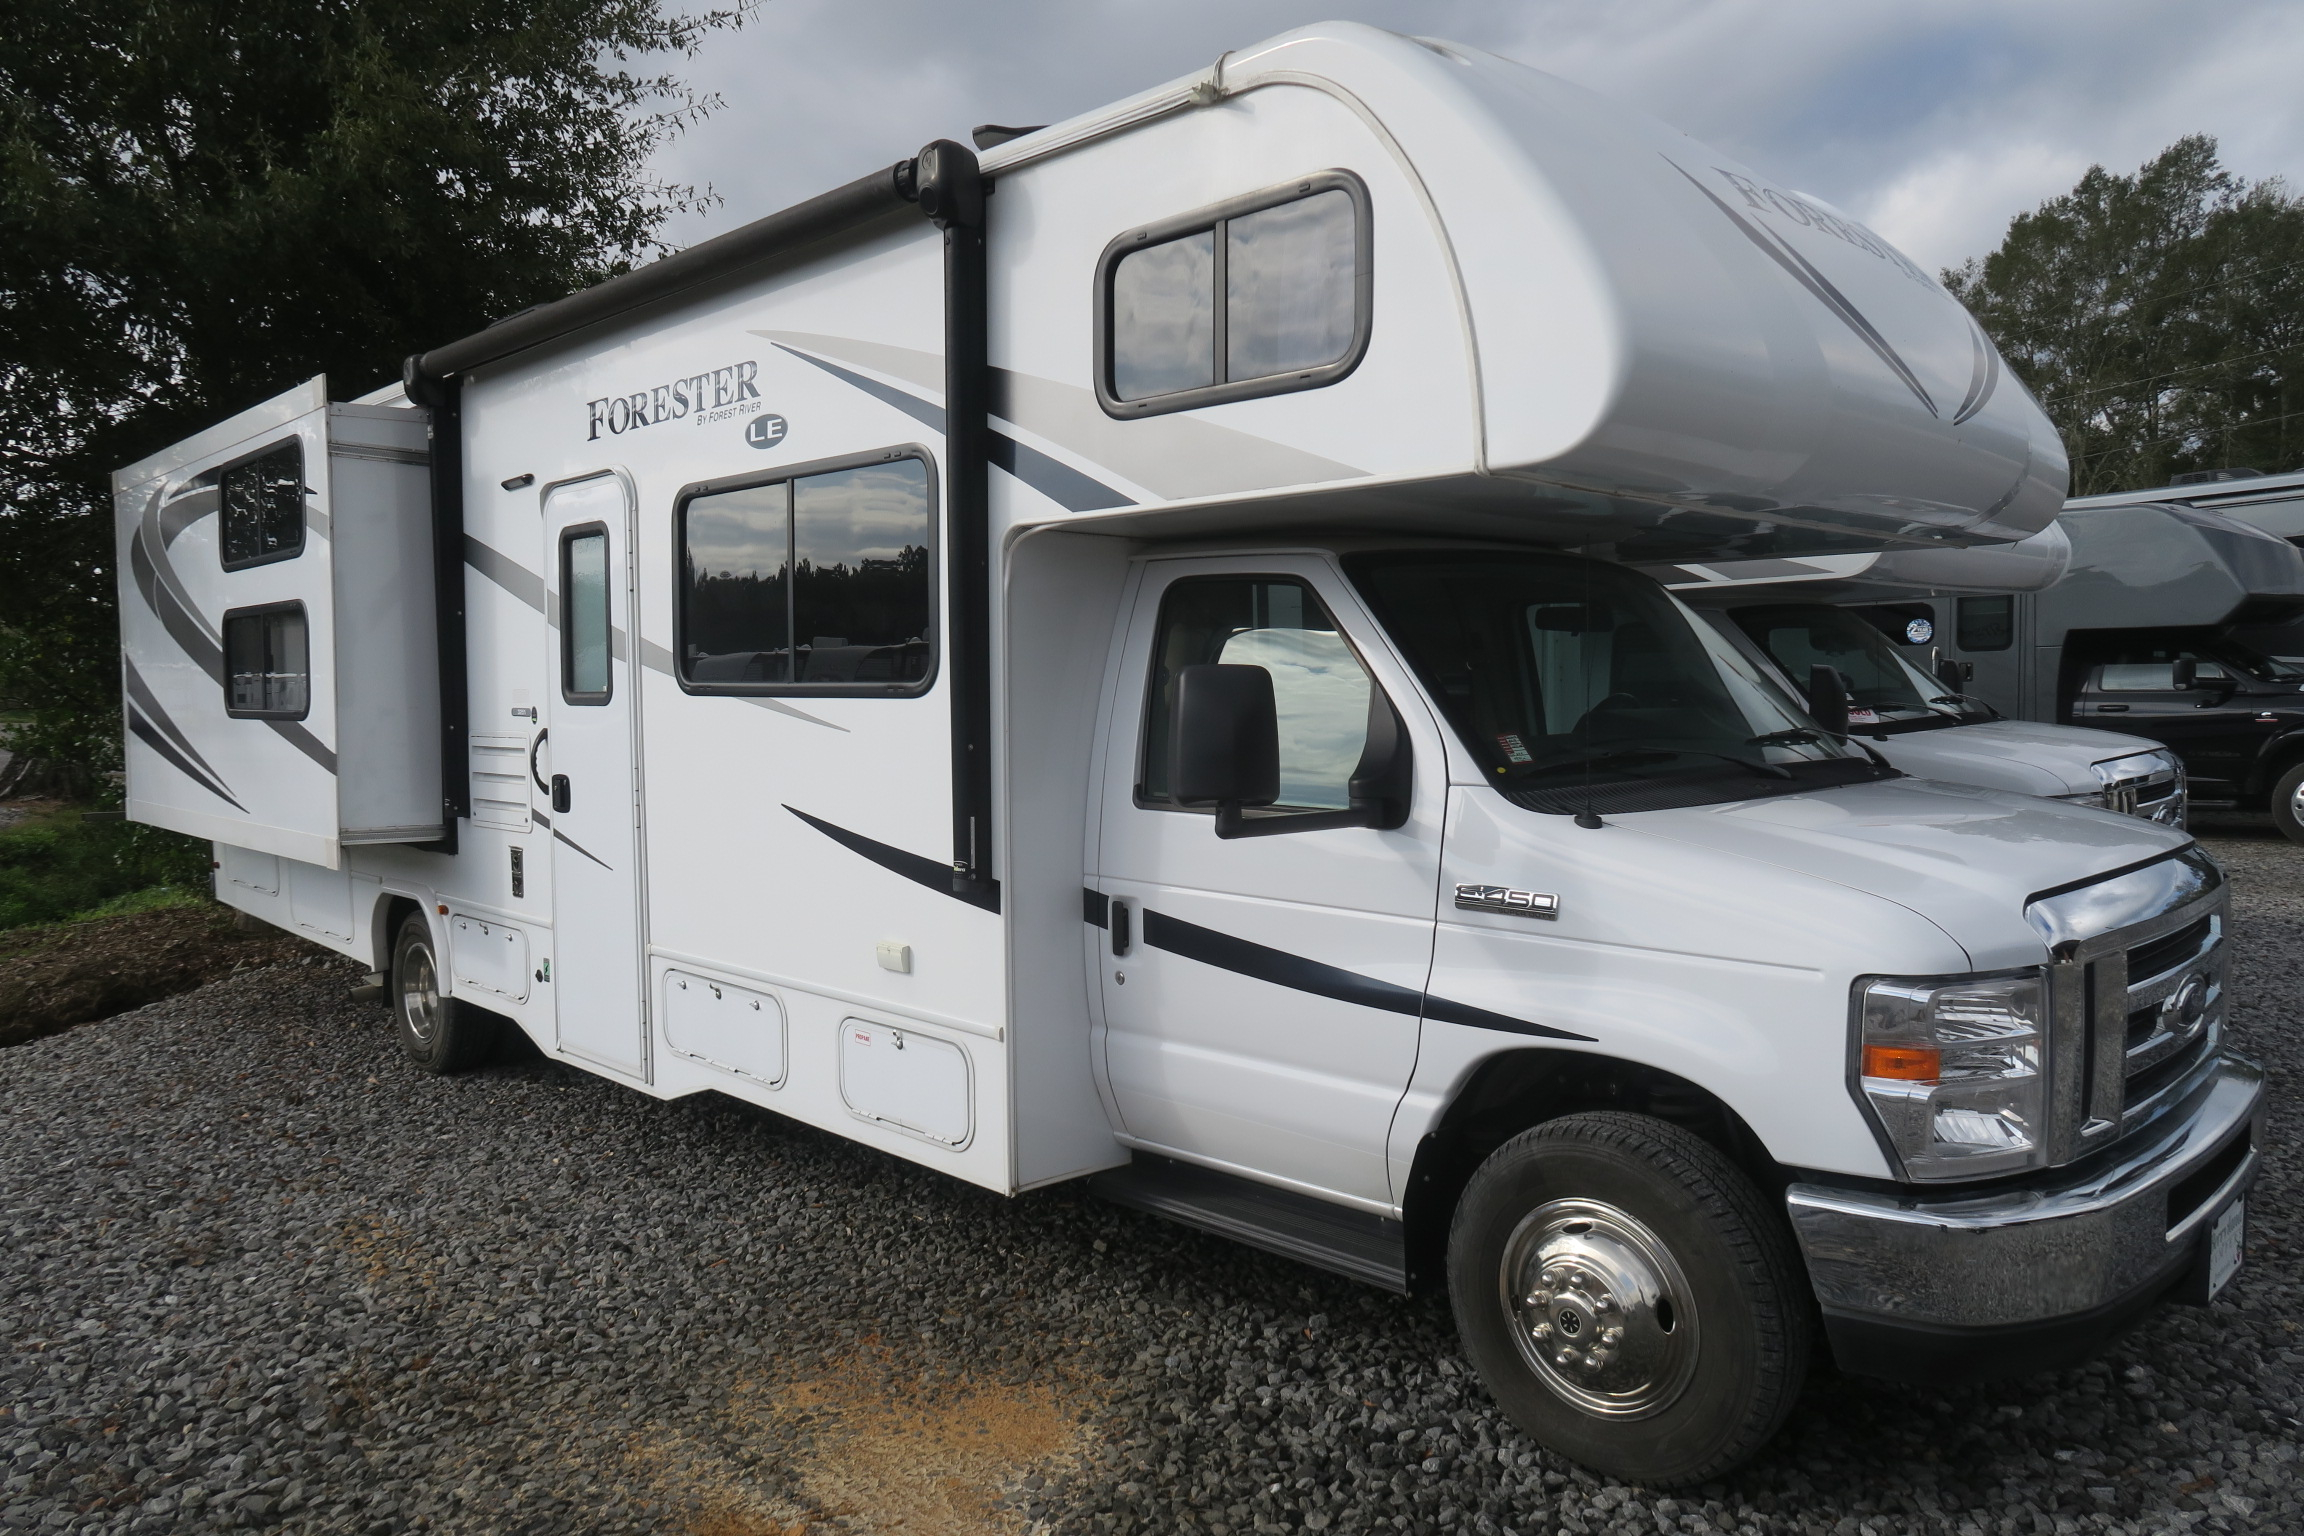 Used Class C Motorhomes For Sale By Owner Near Me - www.inf-inet.com